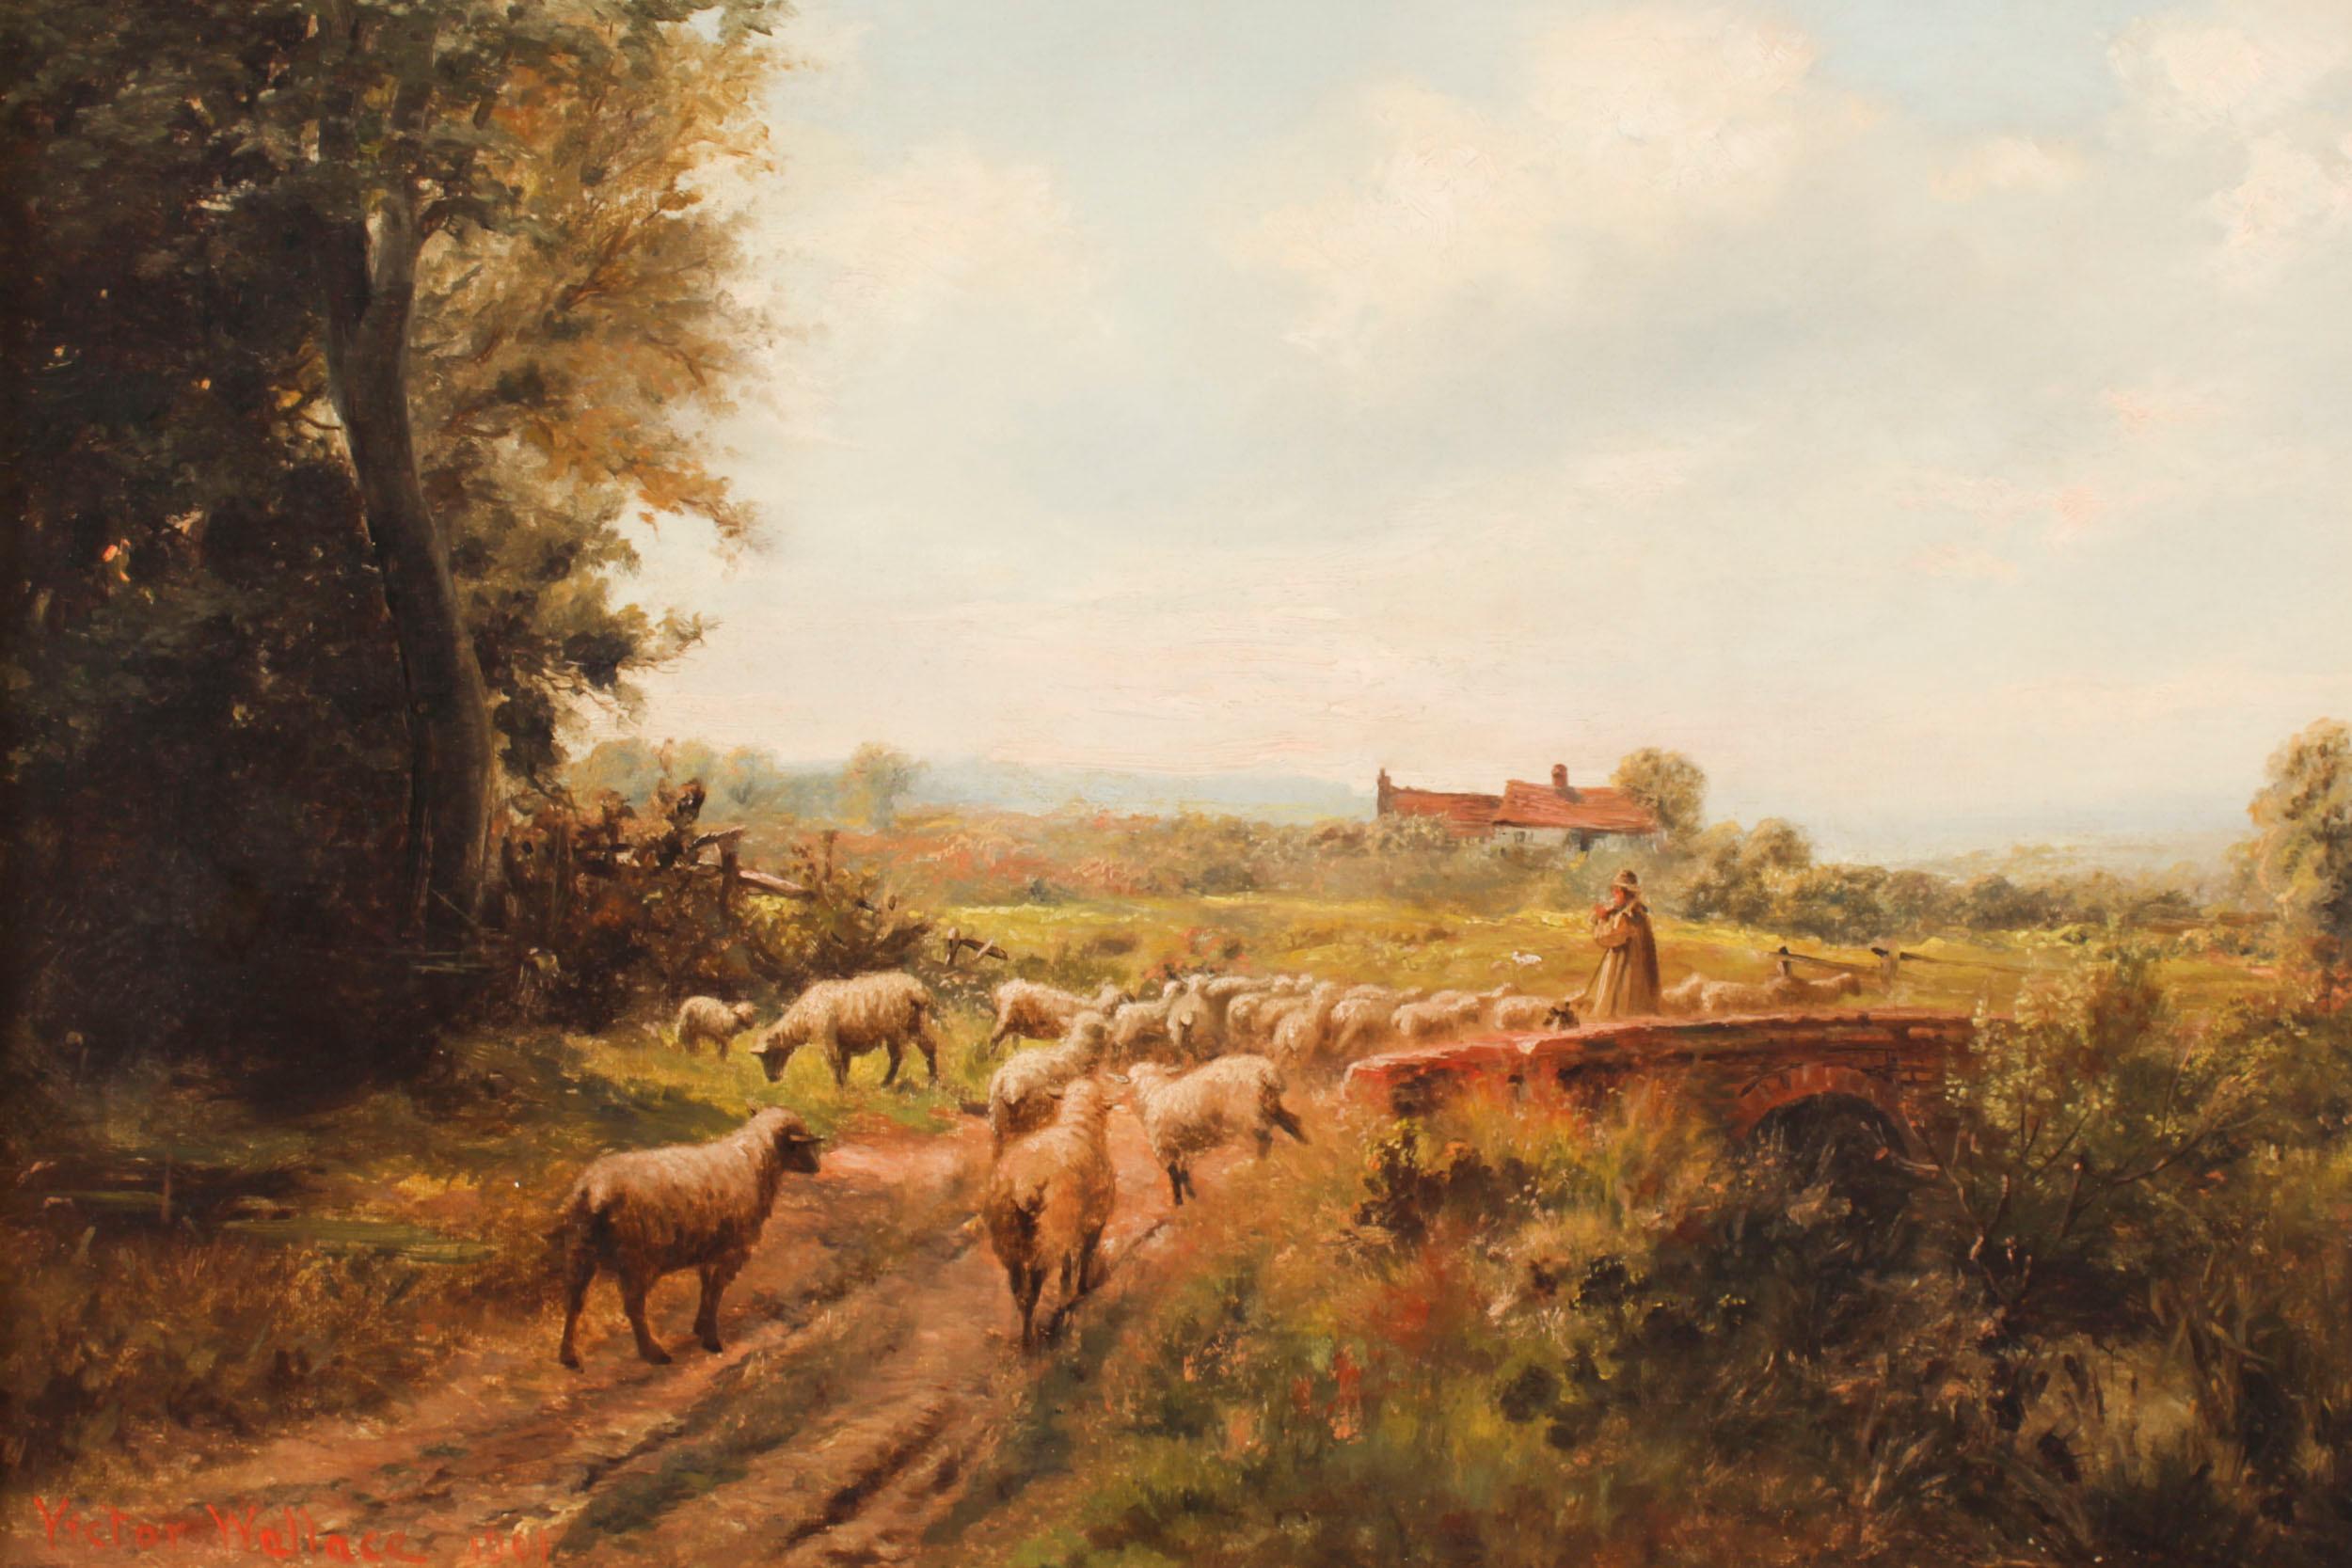 A shepherd and his flock crossing a stone bridge, by Victor Wallace, signed and dated 1901 lower left.
 
The painting delightfully presents a rustic landscape with a shepherd and his flock of sheep crossing a stone bridge with a stone cottage and a